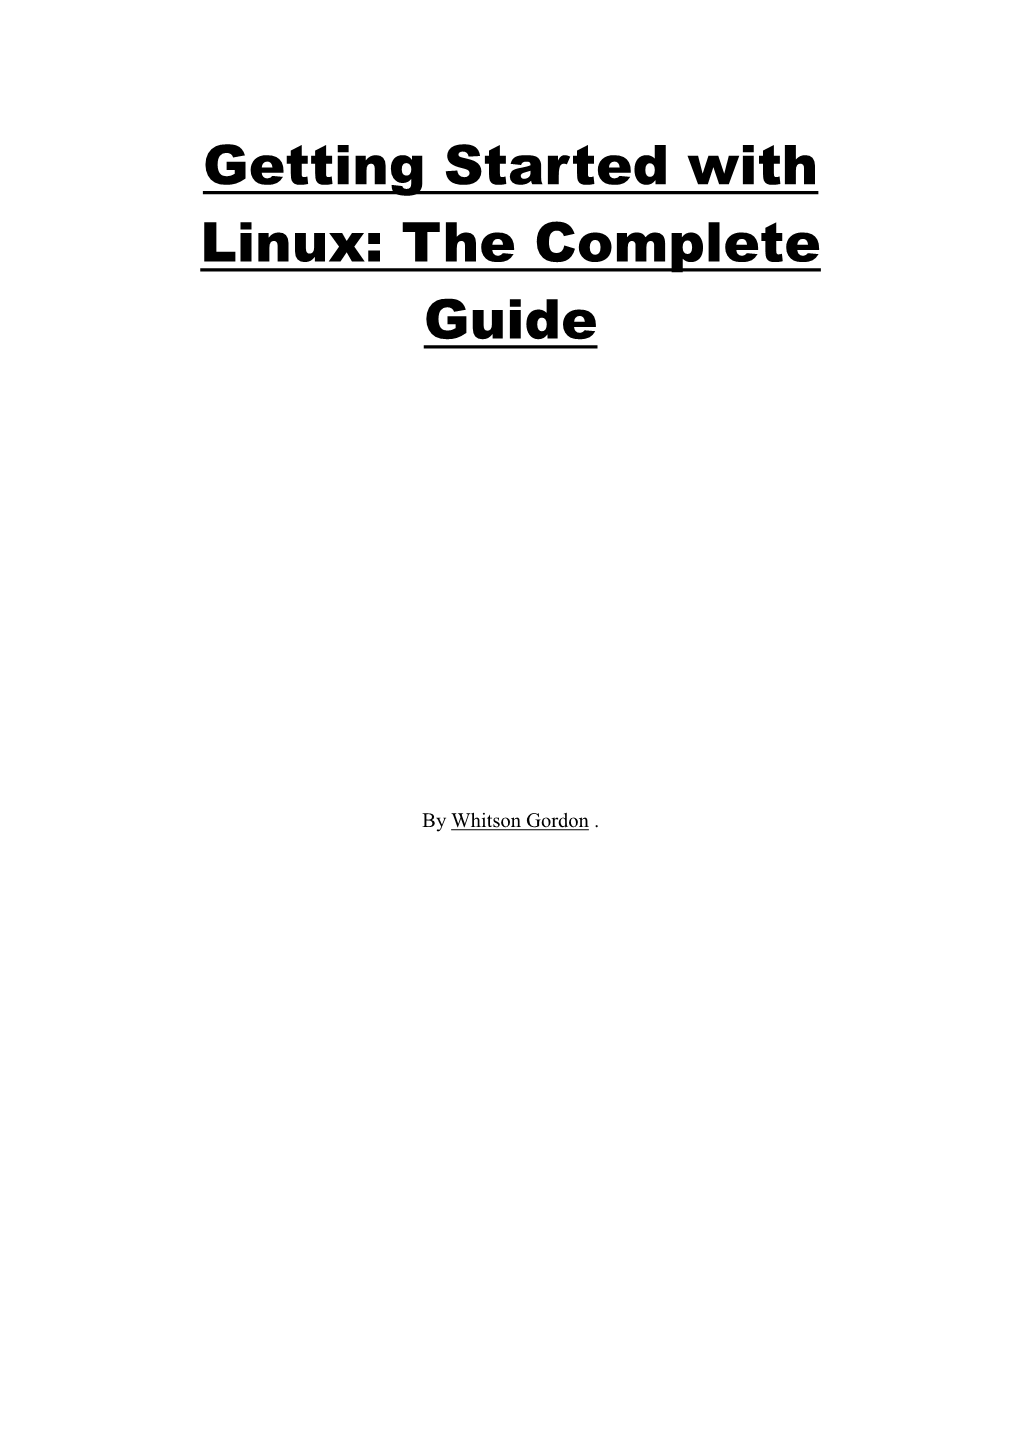 Getting Started with Linux: the Complete Guide